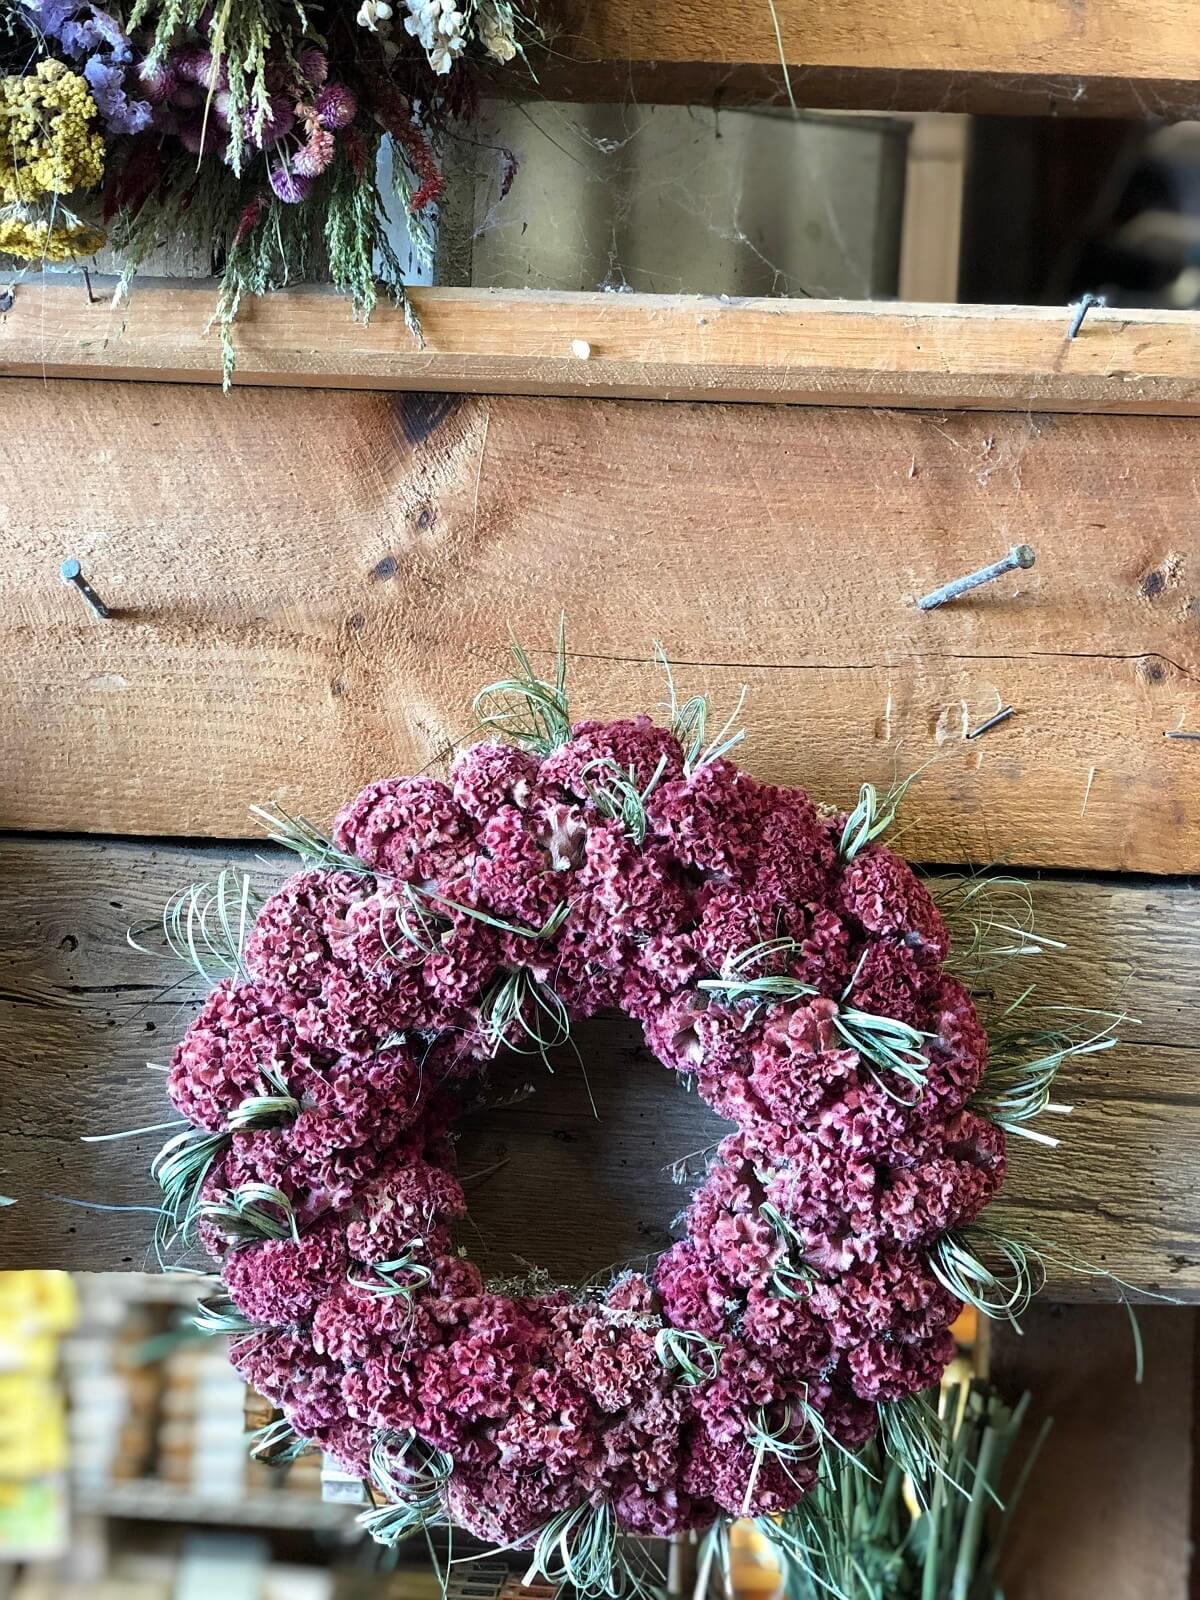 Blog :: Quick Guide on Dried Flower Decorating